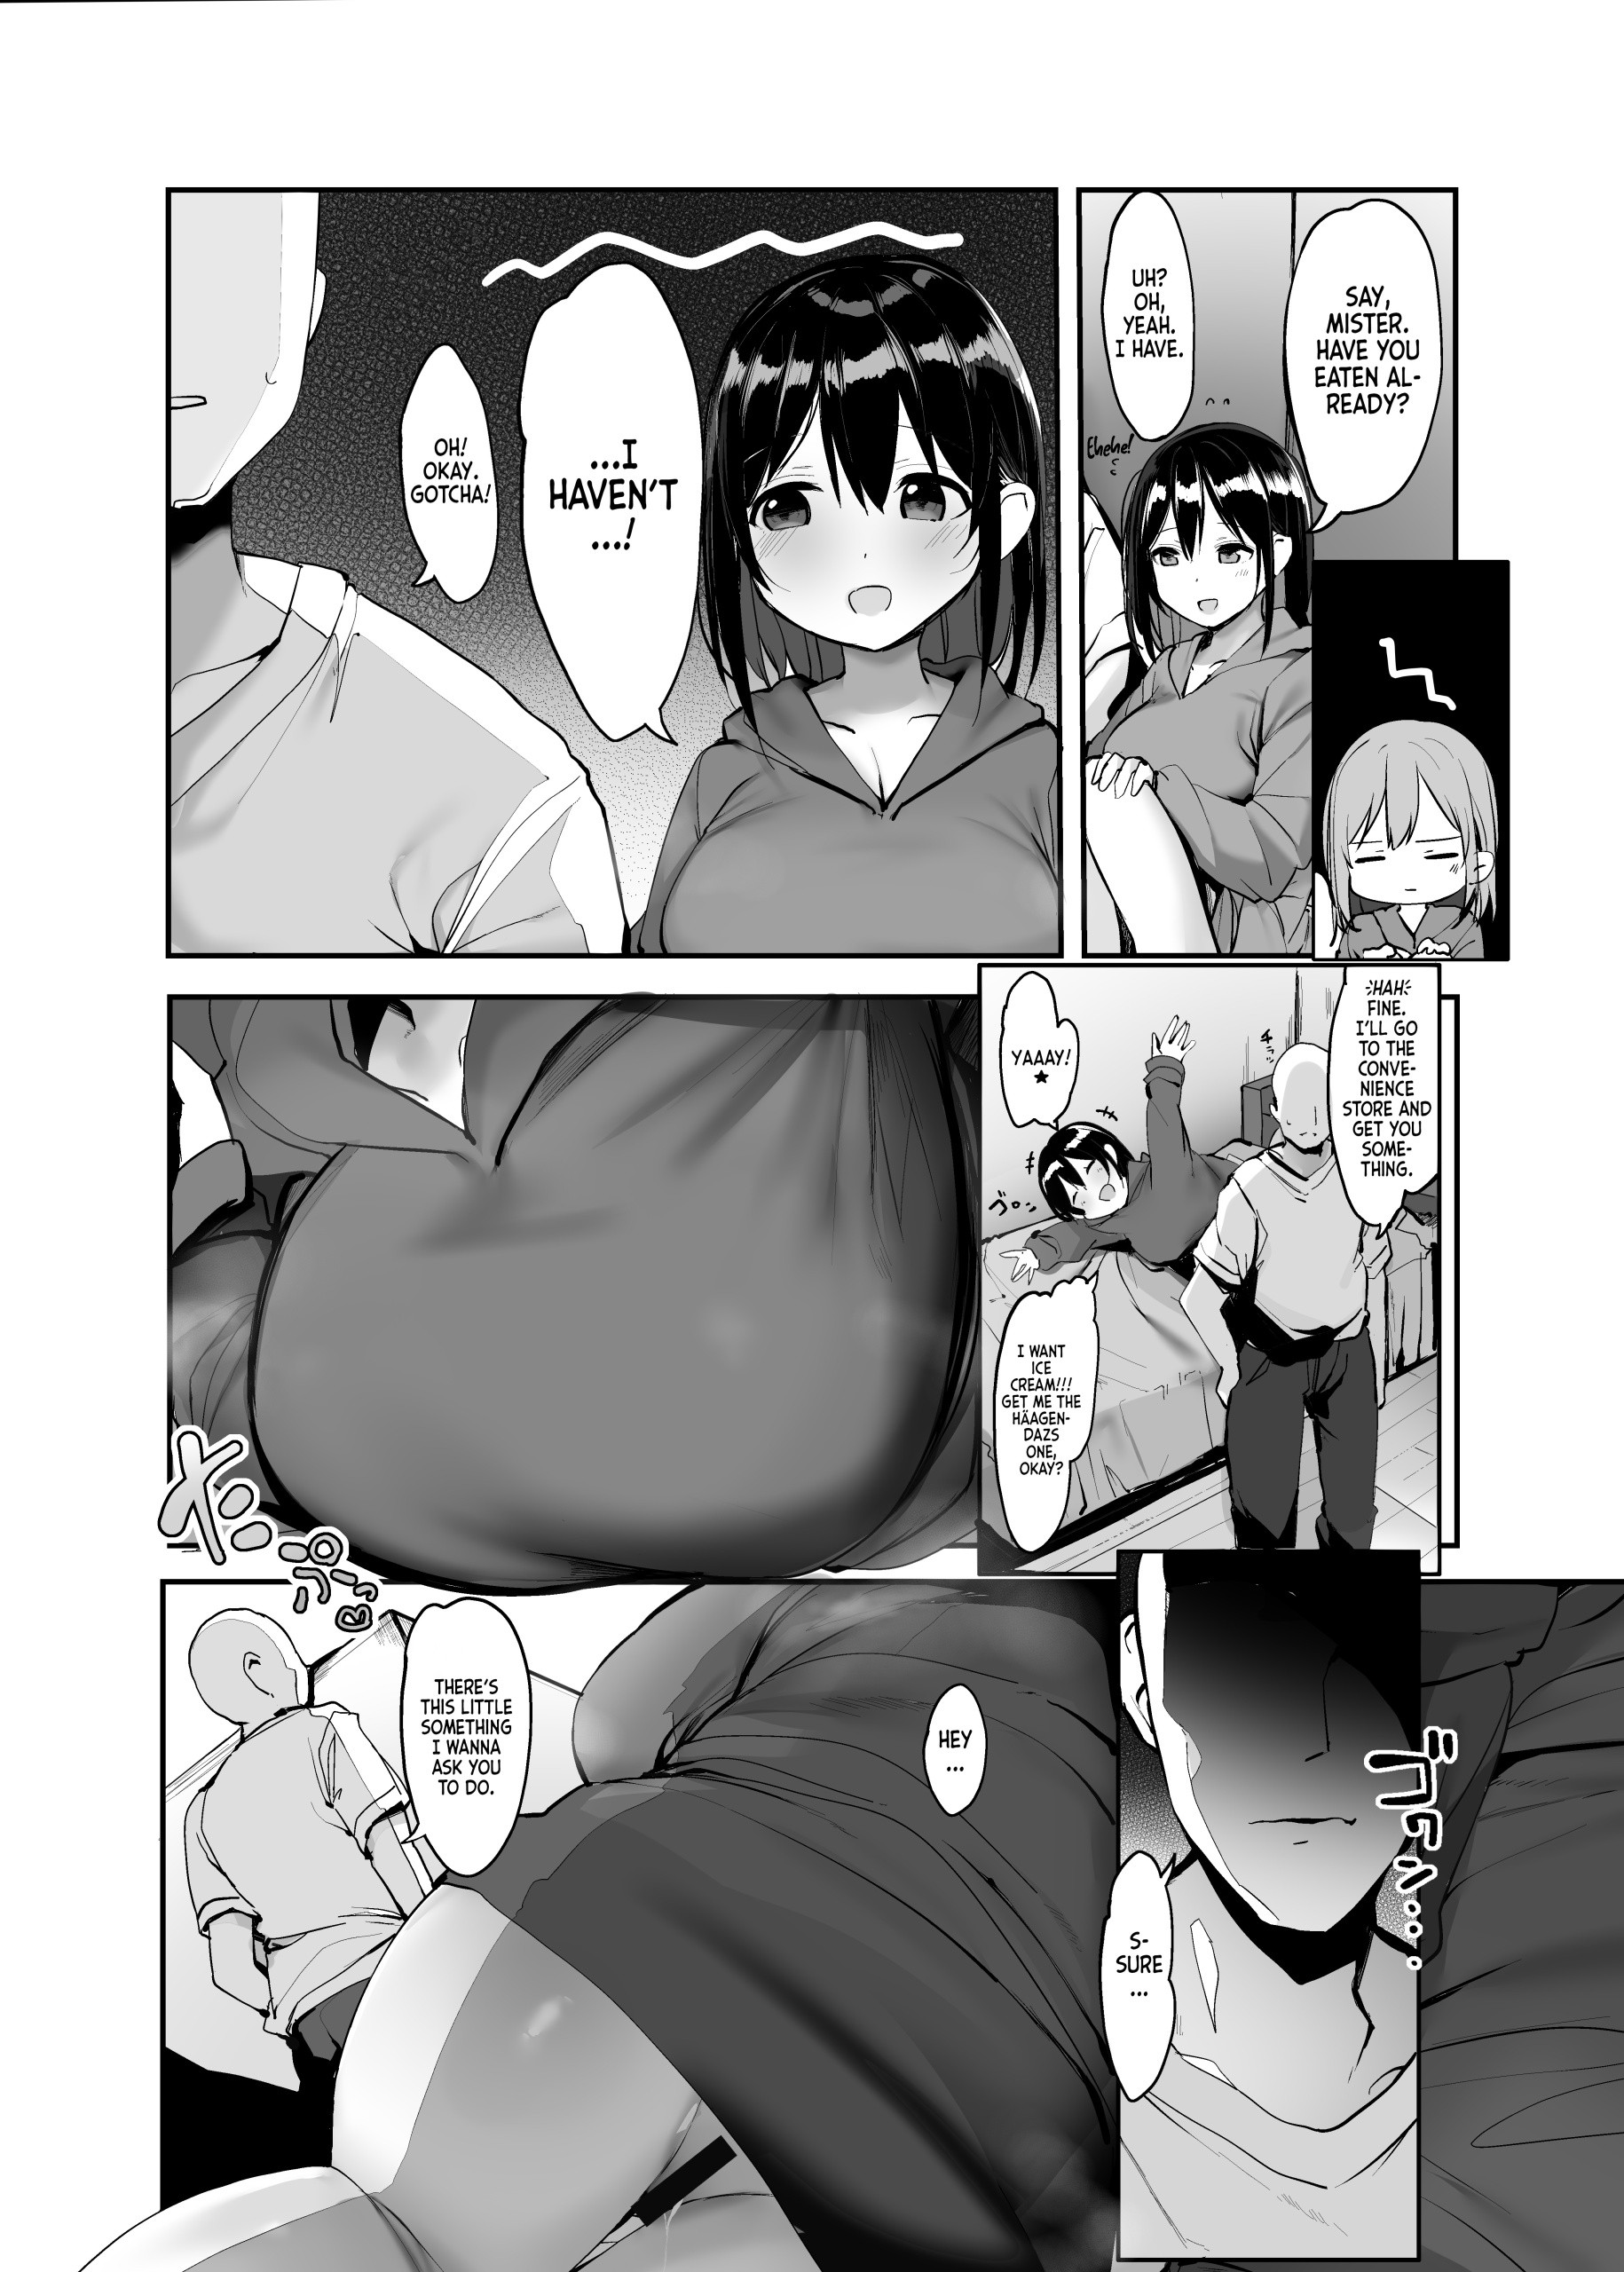 Can I Stay Over, Mister hentai manga picture 20